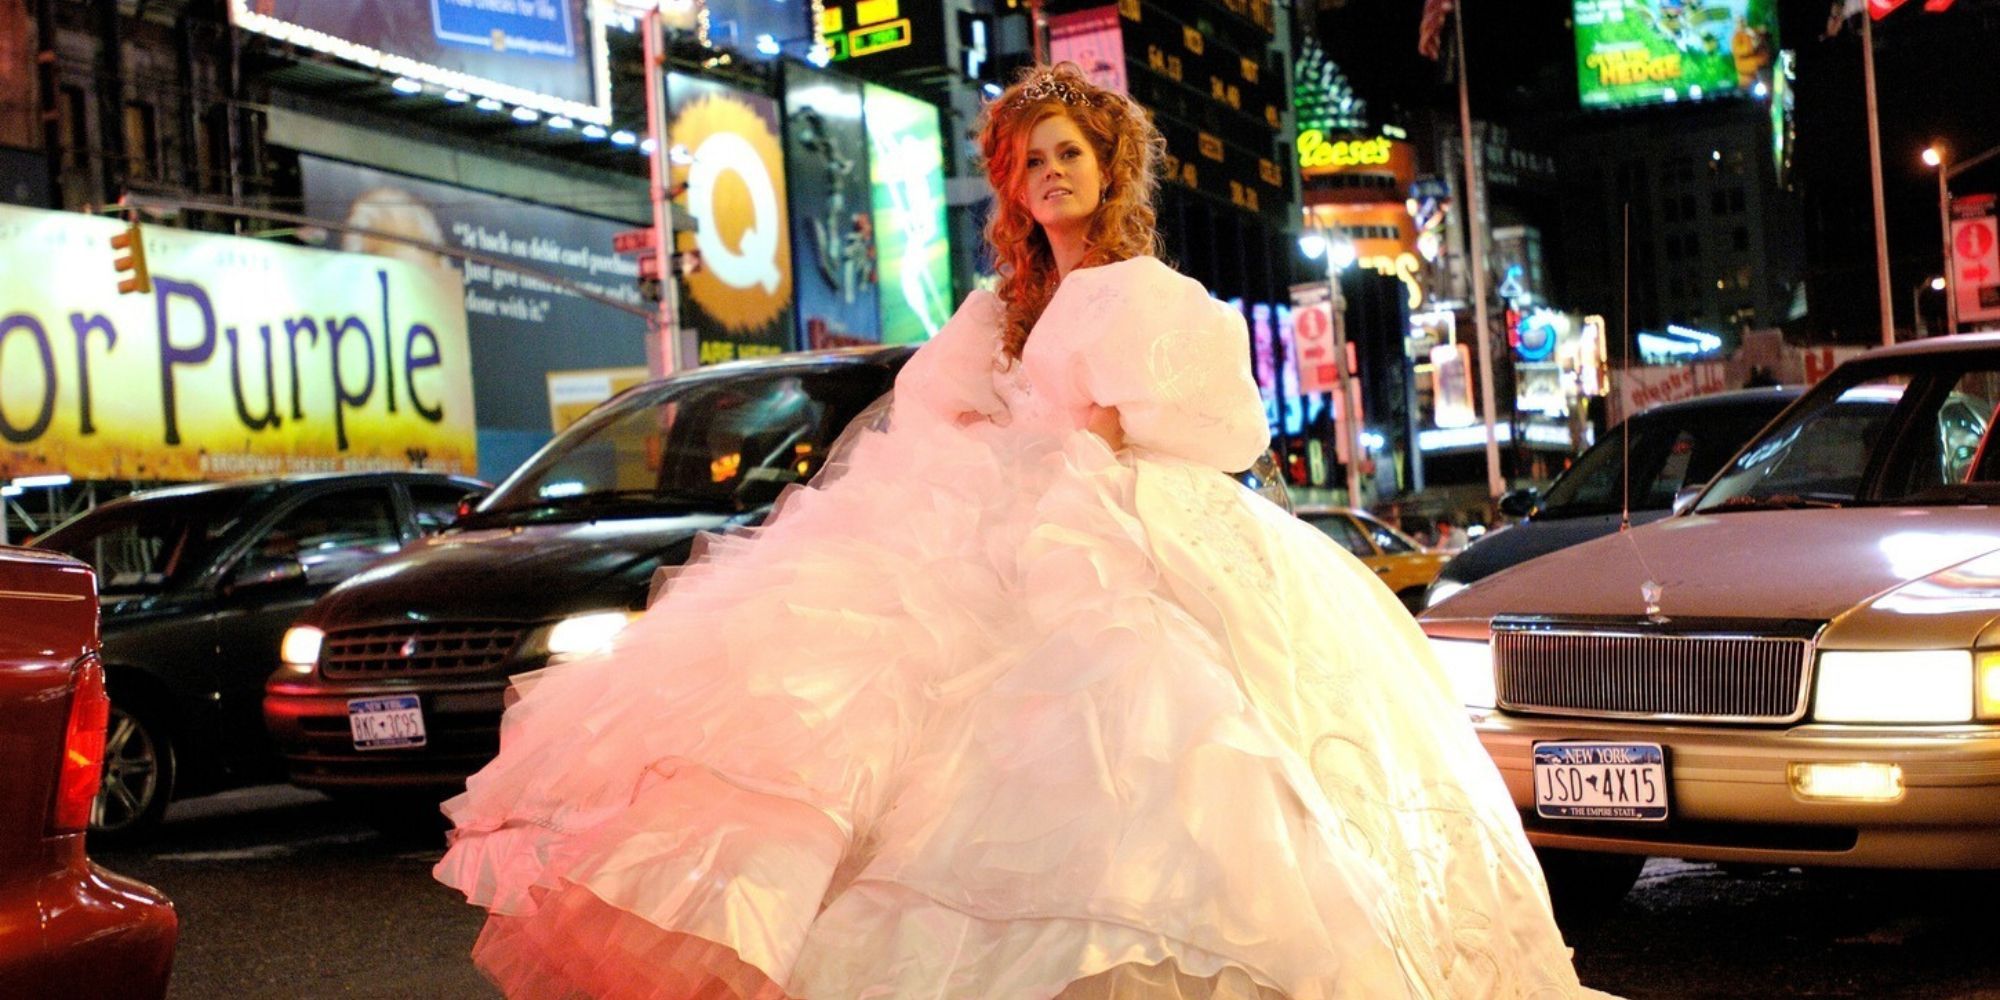 Enchanted's Giselle in her wedding dress in the middle of a Manhattan street